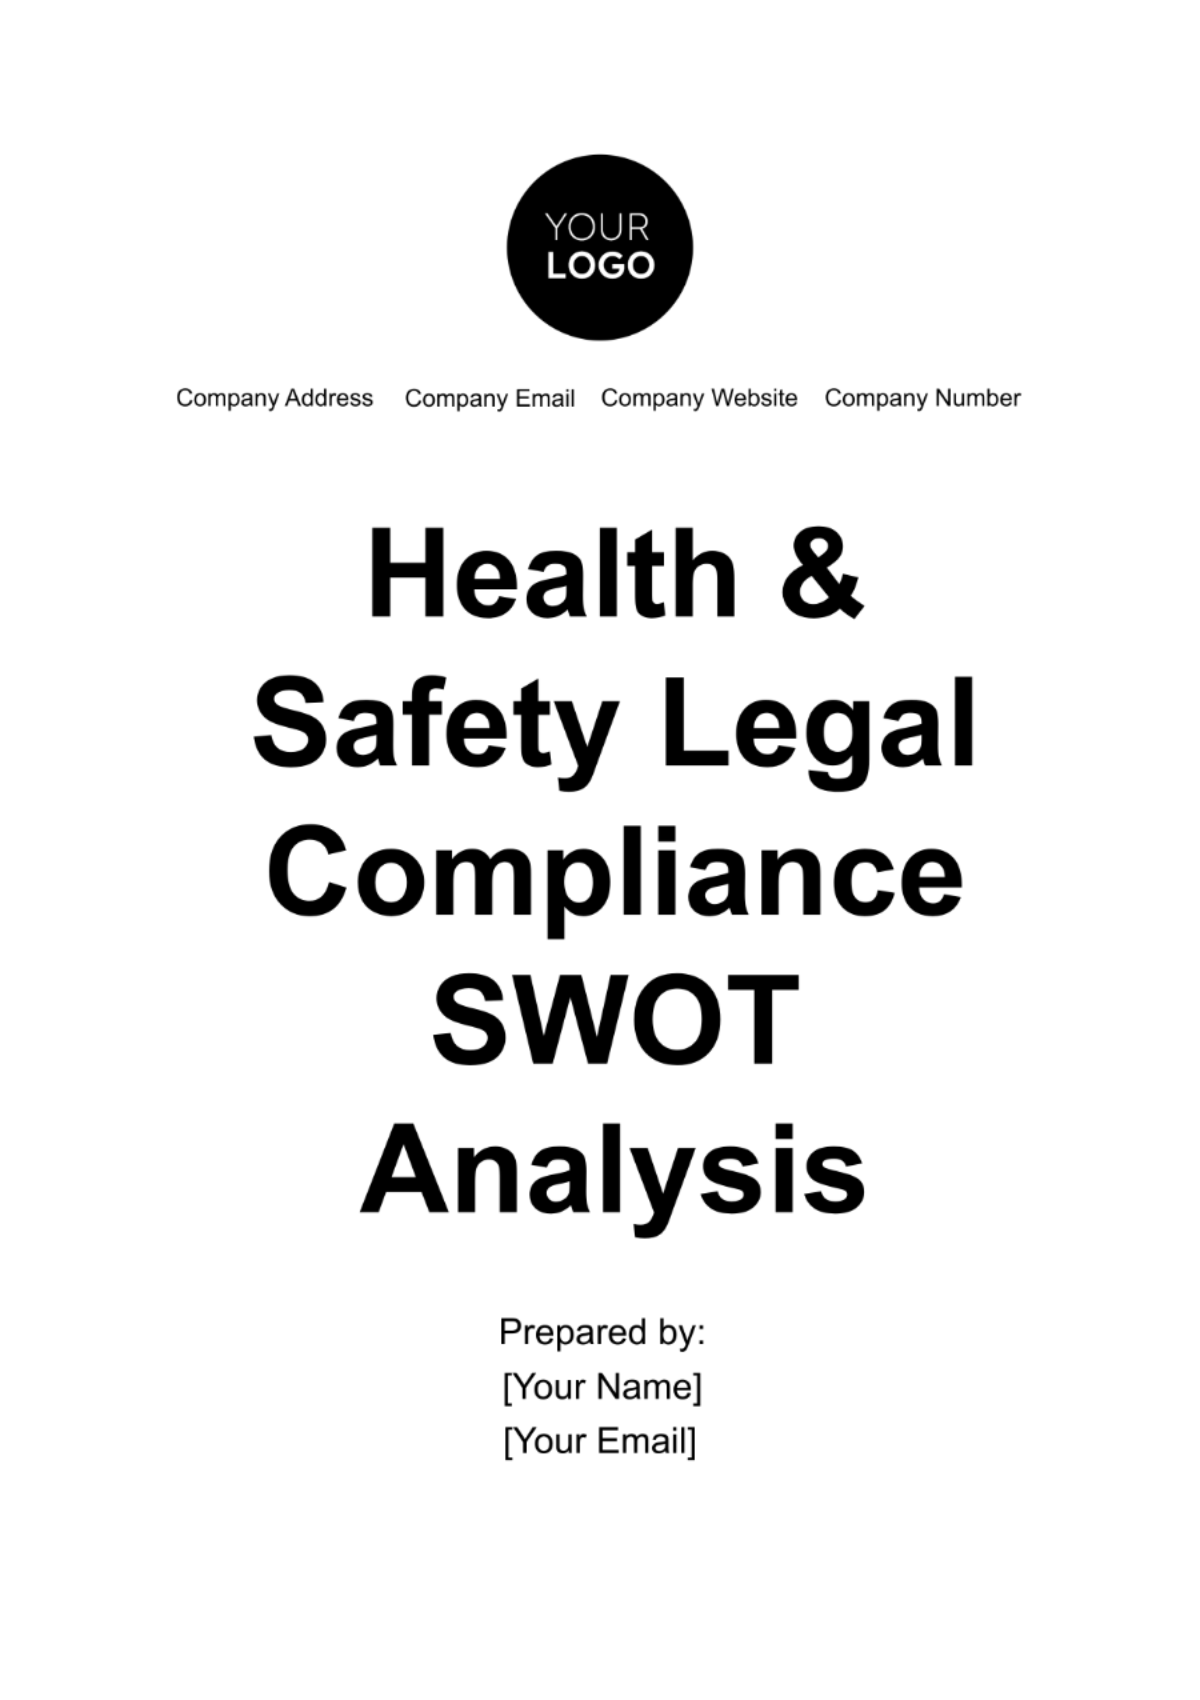 Free Health & Safety Legal Compliance SWOT Analysis Template